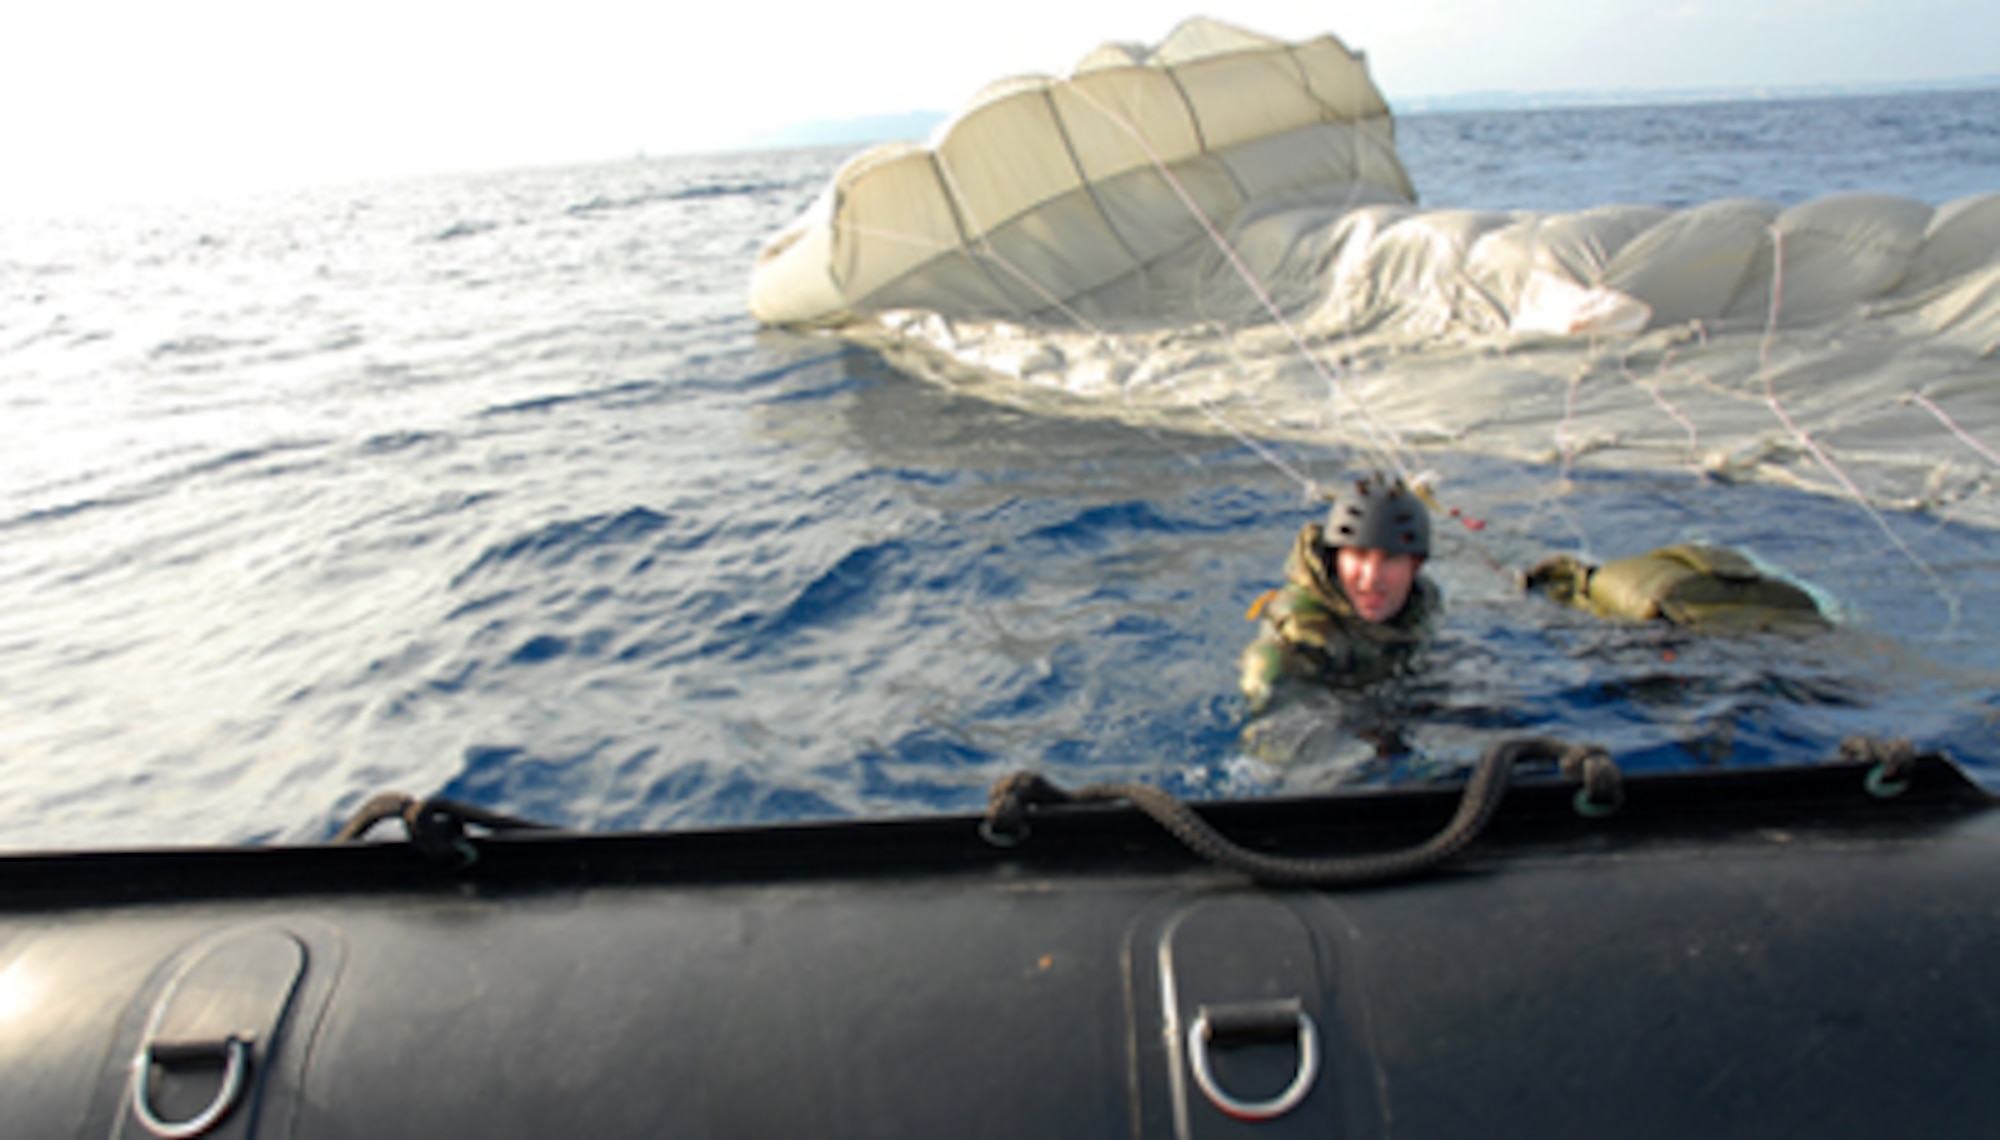 Capt. J. Harman from the 31st Rescue Squadron, Kadena Air Base, Japan, swims to the edge of a F470 Zodiac boat after jumping into the warm, blue waters of Okinawa during a weekly training exercise Jan. 16, at the White Beach Naval facility.  Pararescuemen participate in their weekly proficiency jump which keeps members current in the proper procedures of rescue and keeps them mission ready.  (U.S. Air Force photo/ Airman 1st Class Kelly Timney)